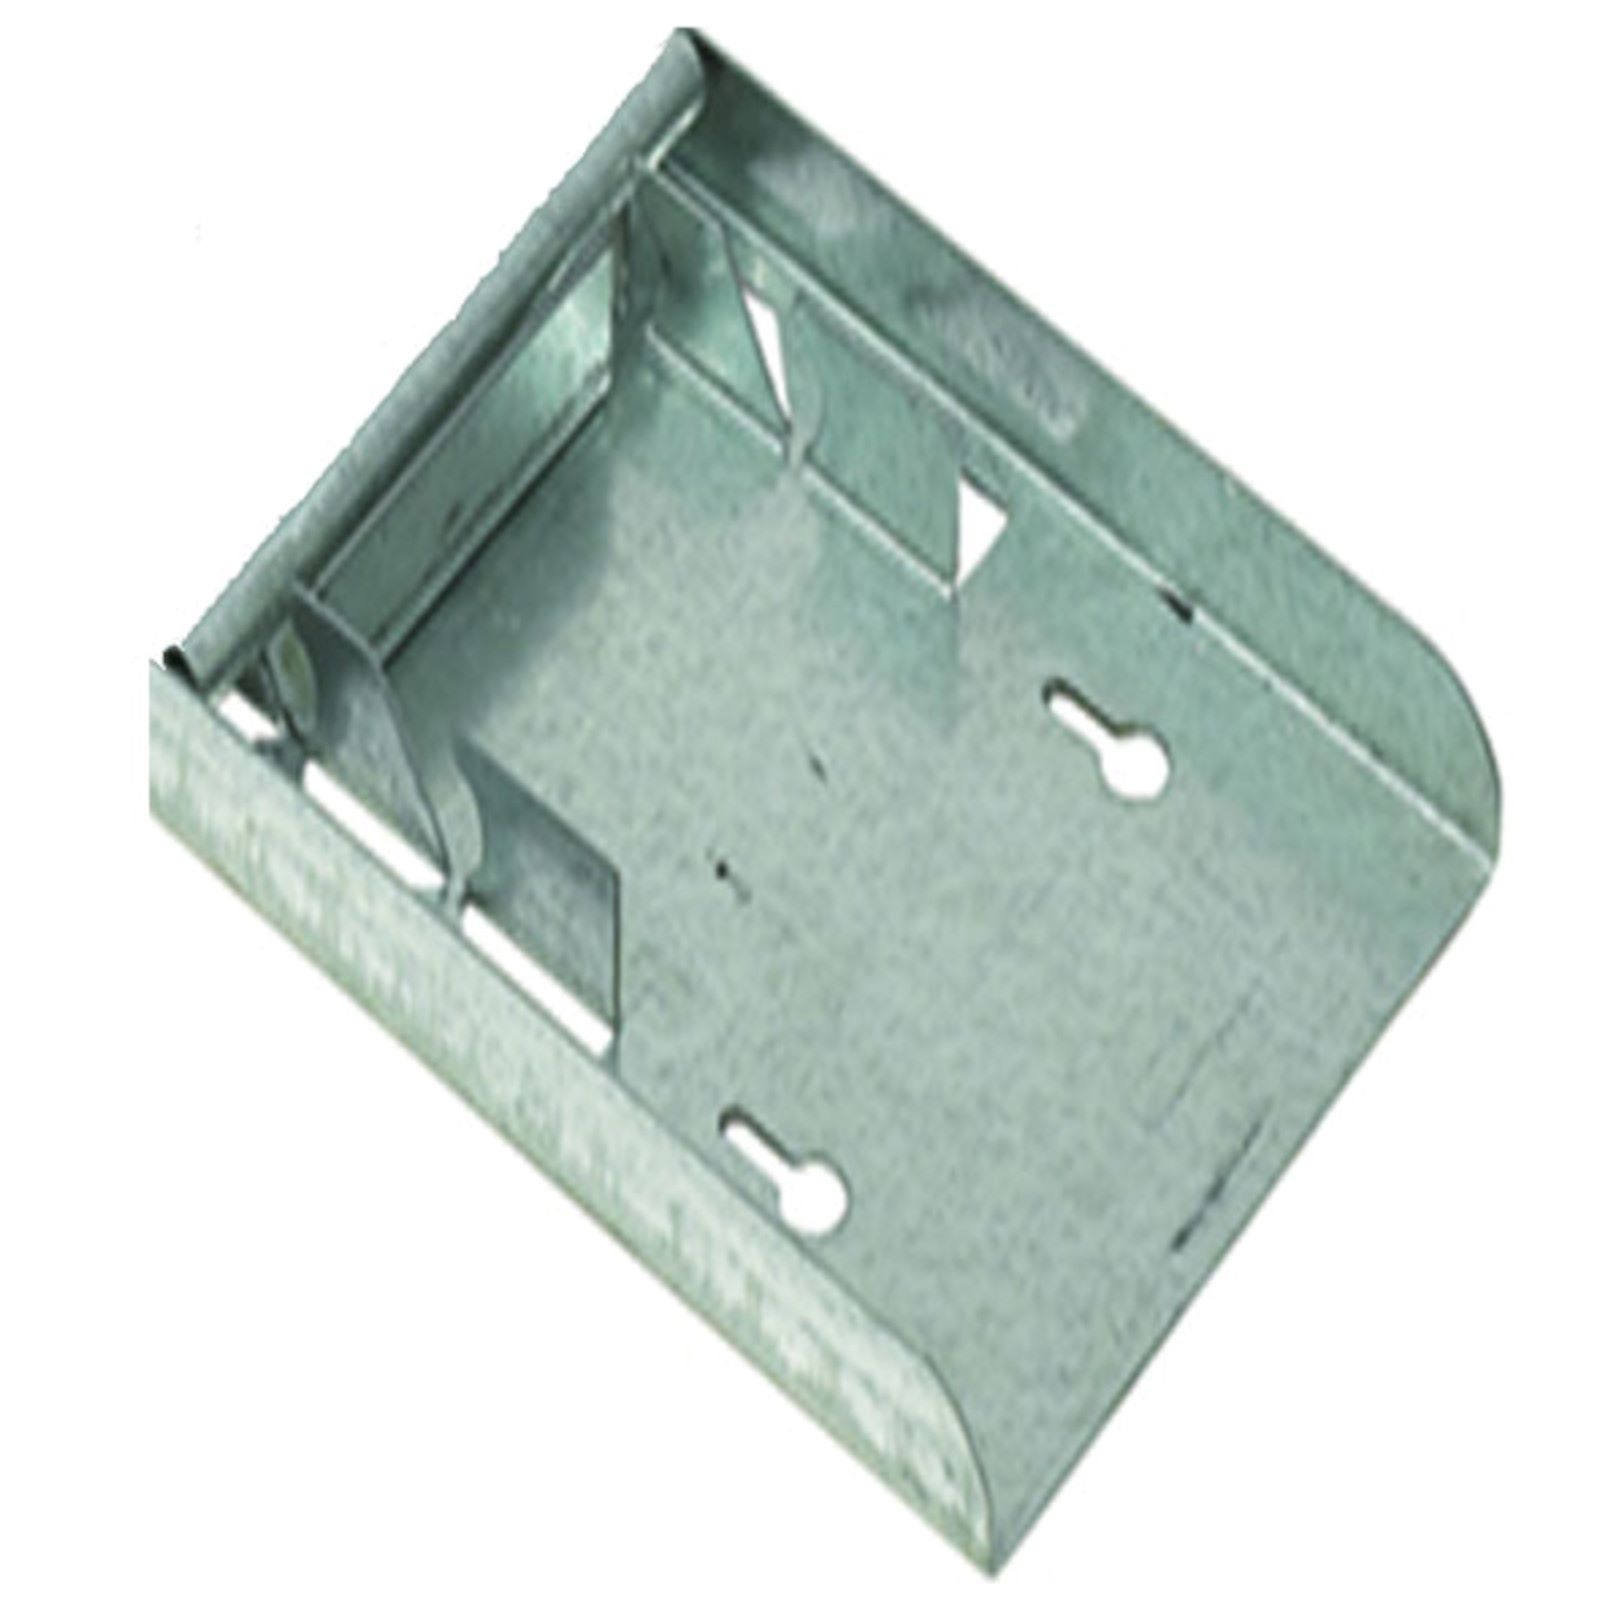 Qual-Craft Slater Style Roof Bracket Replacement Nailing Plate